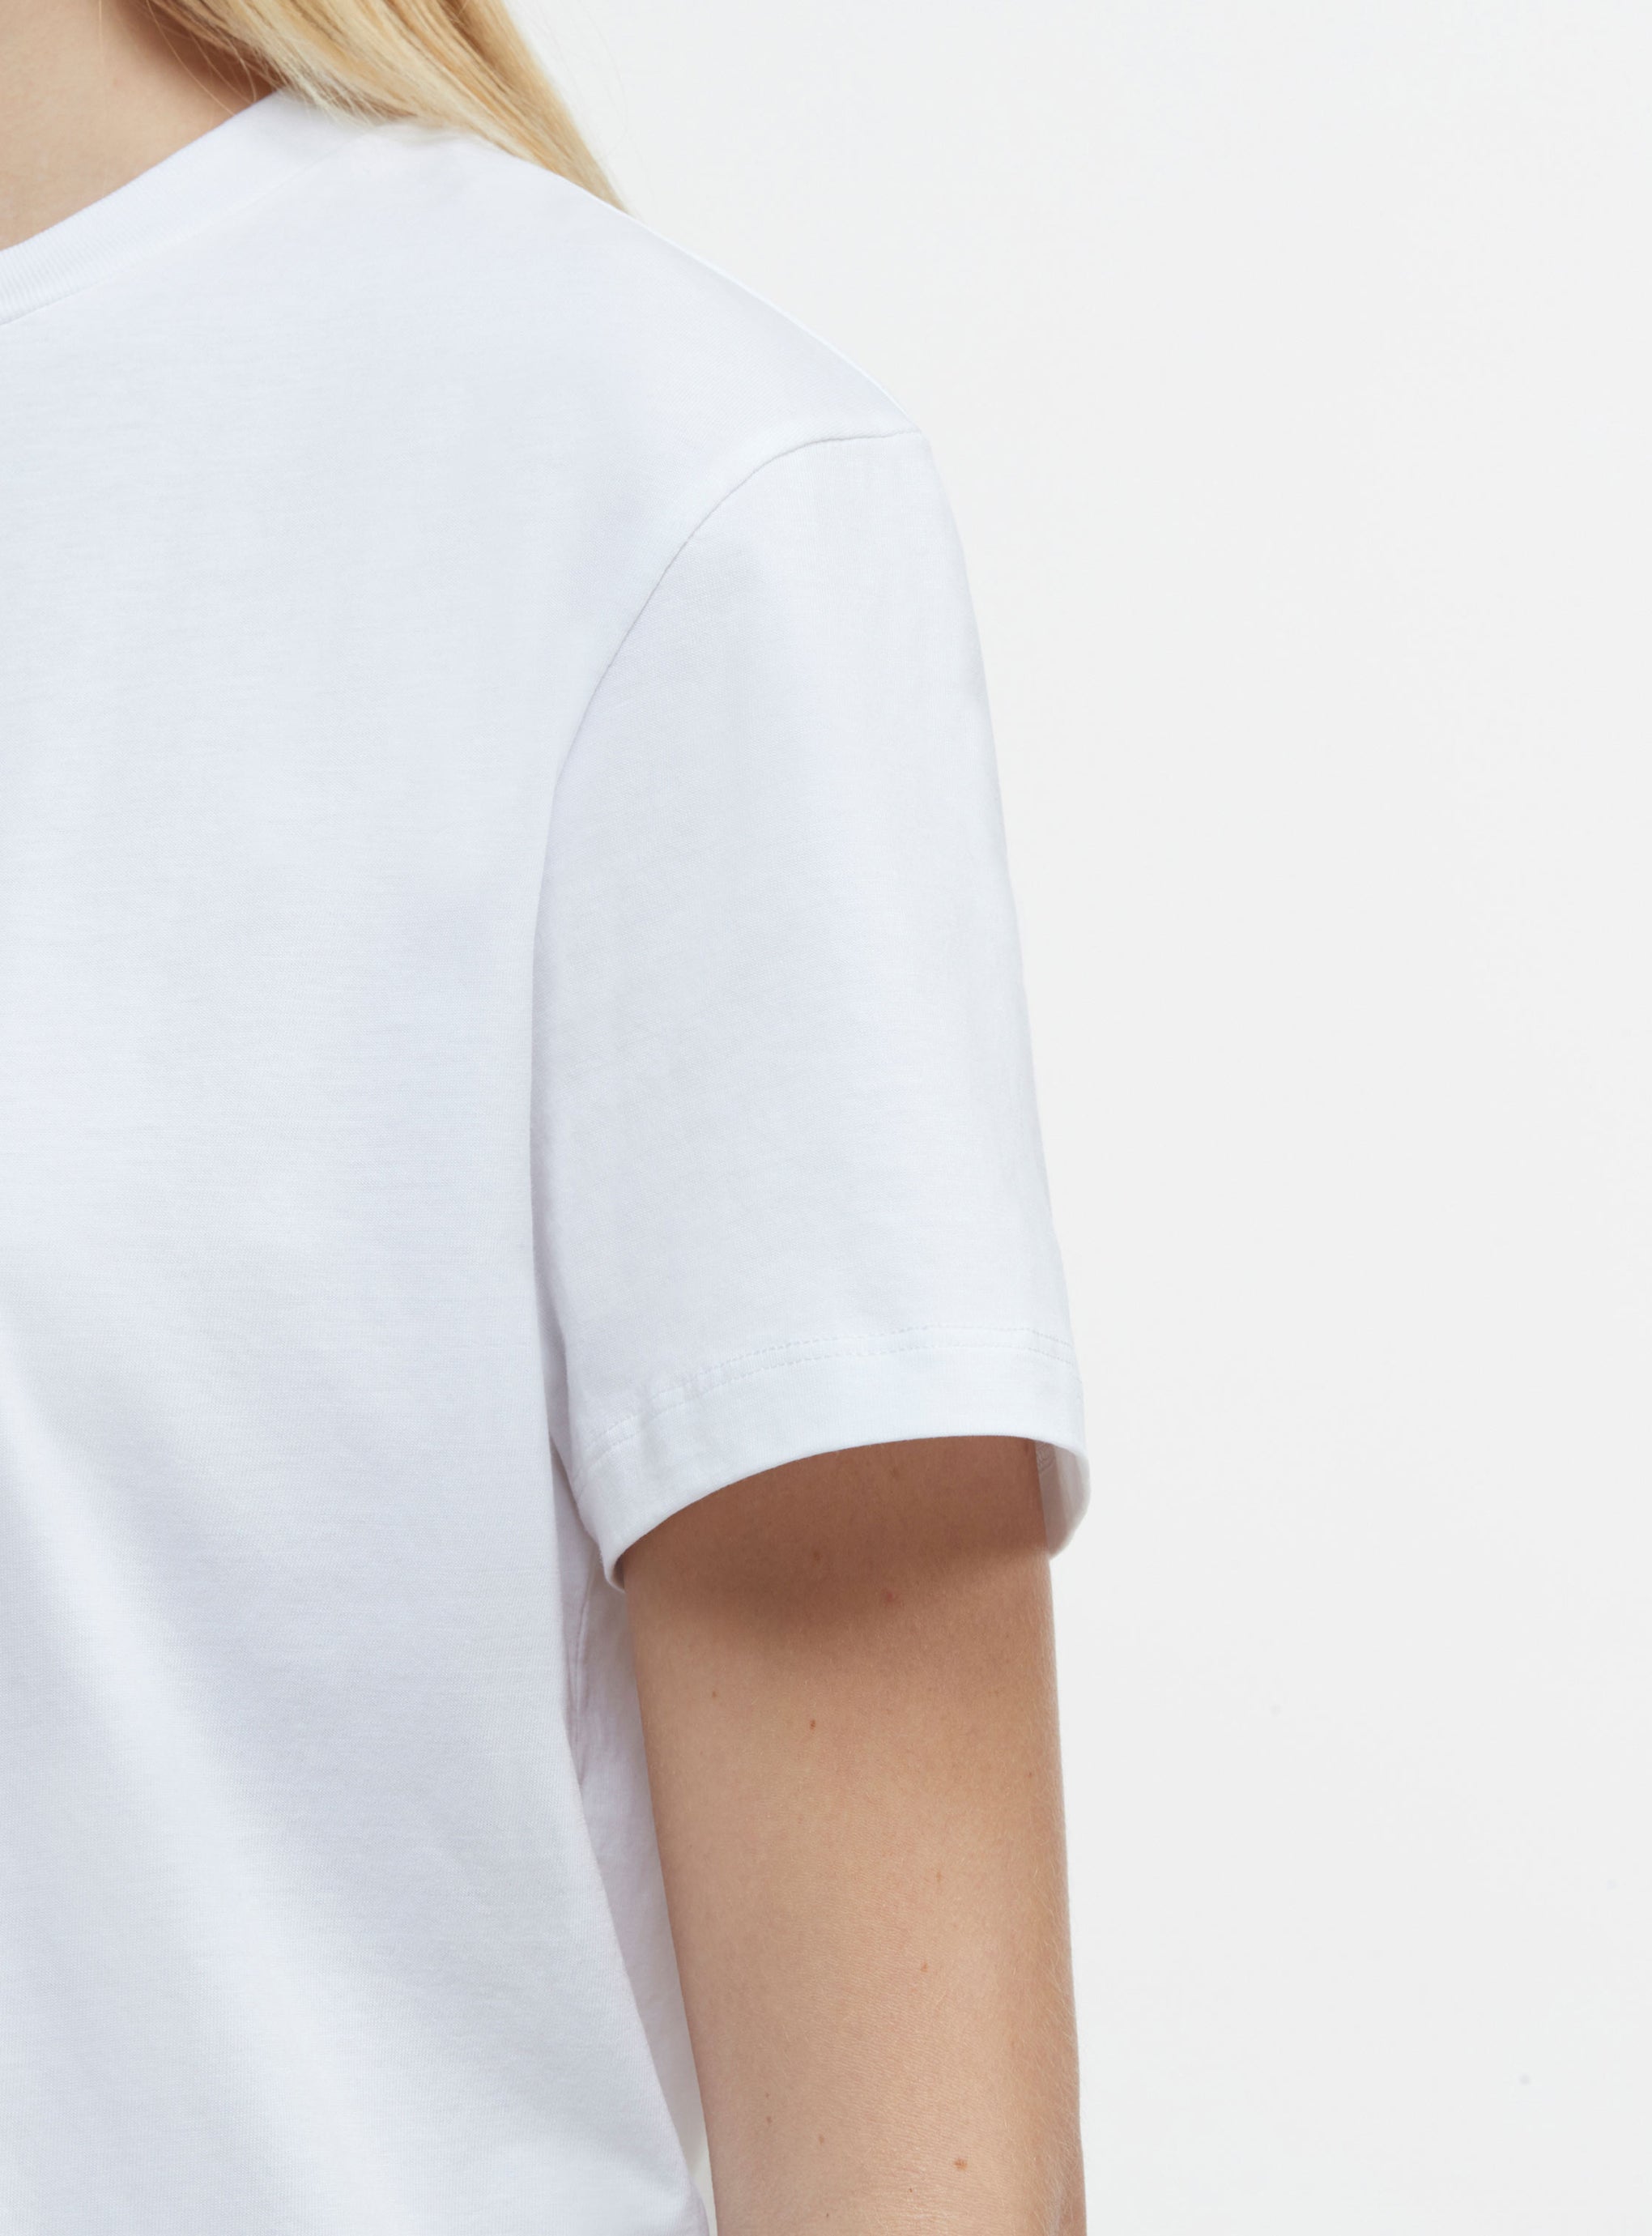 The Wardrobe NYC Classic T Shirt in White available at The New Trend Australia